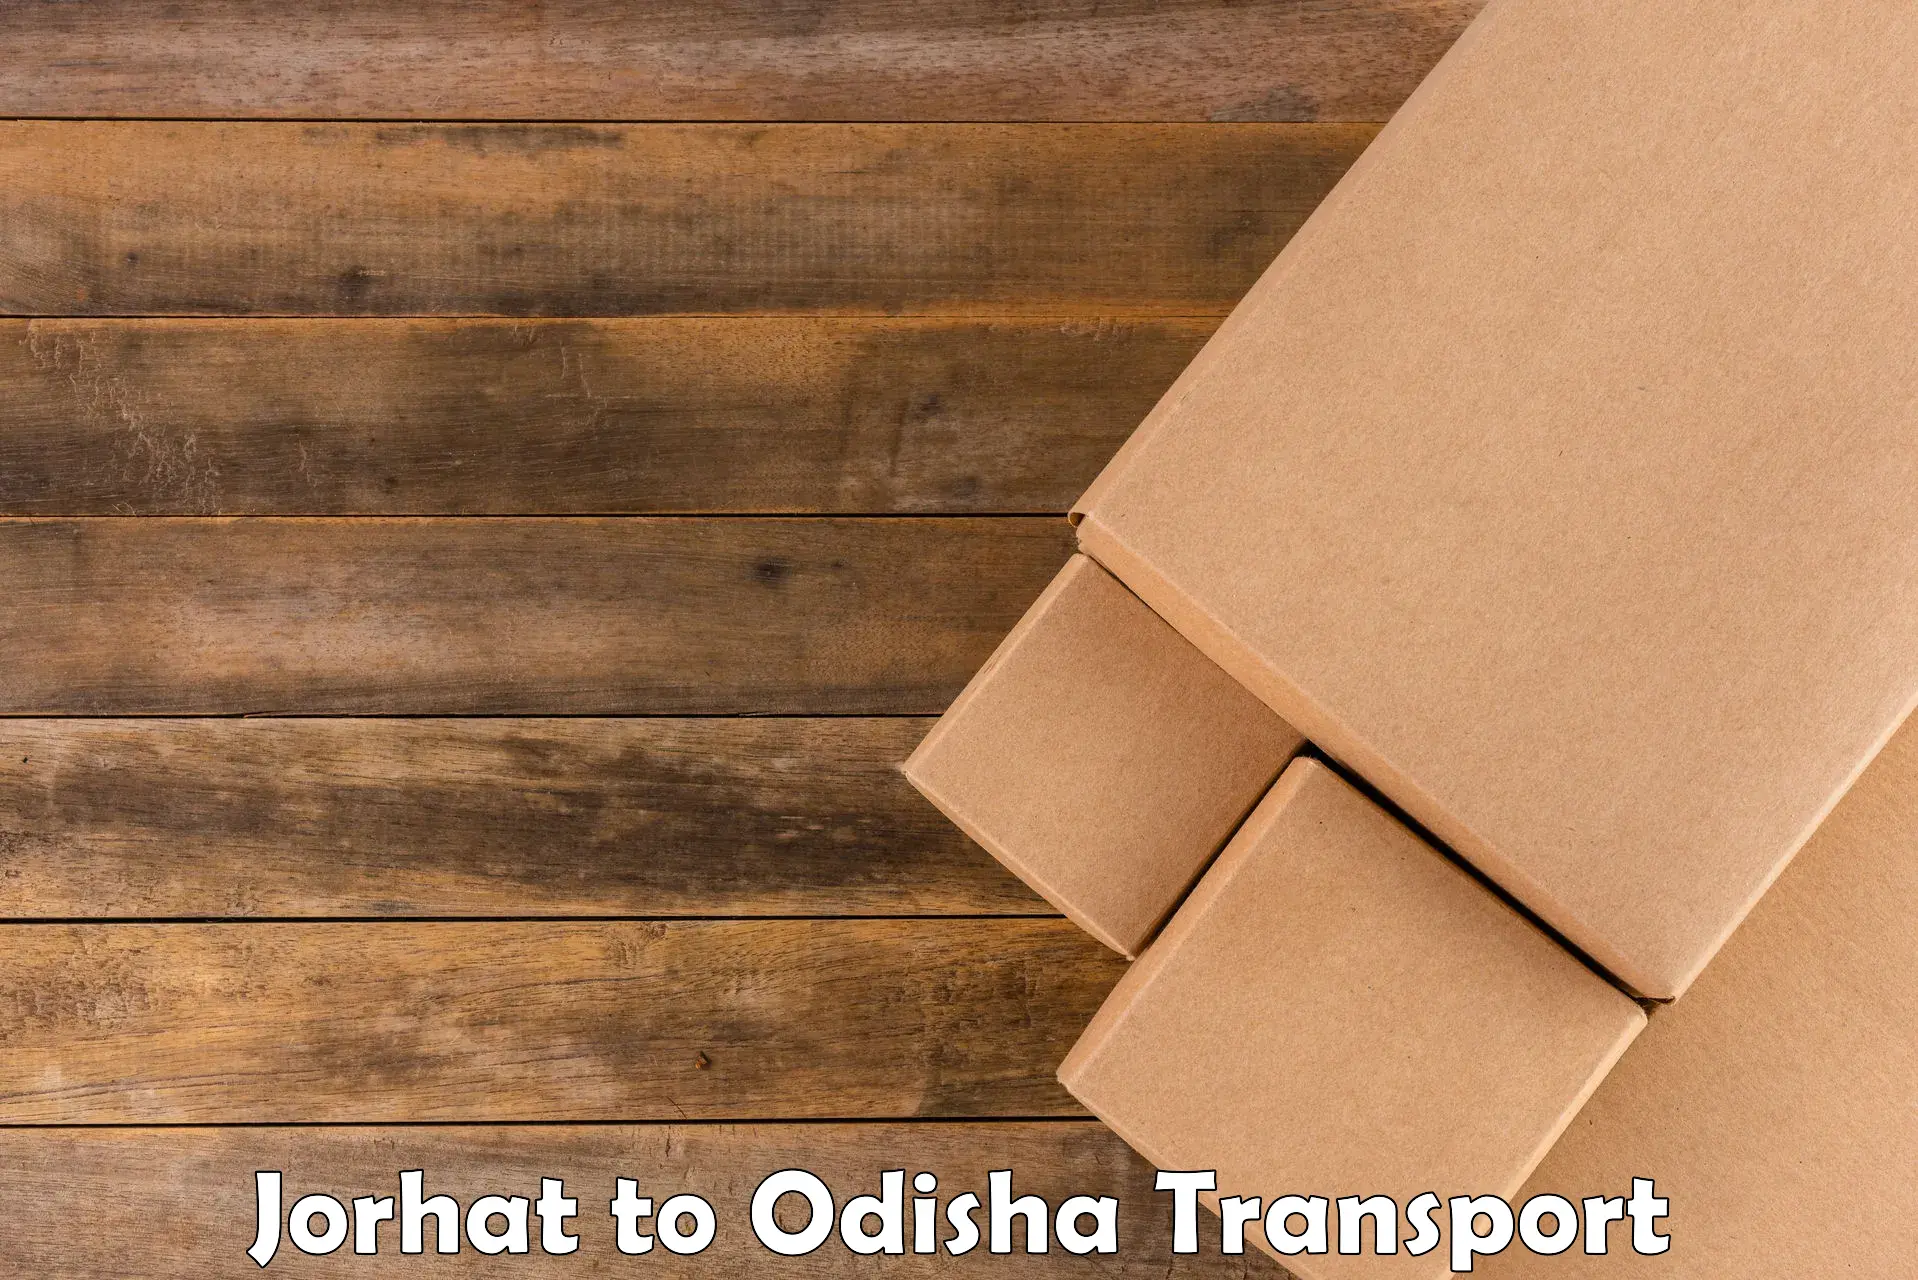 Truck transport companies in India Jorhat to Muribahal